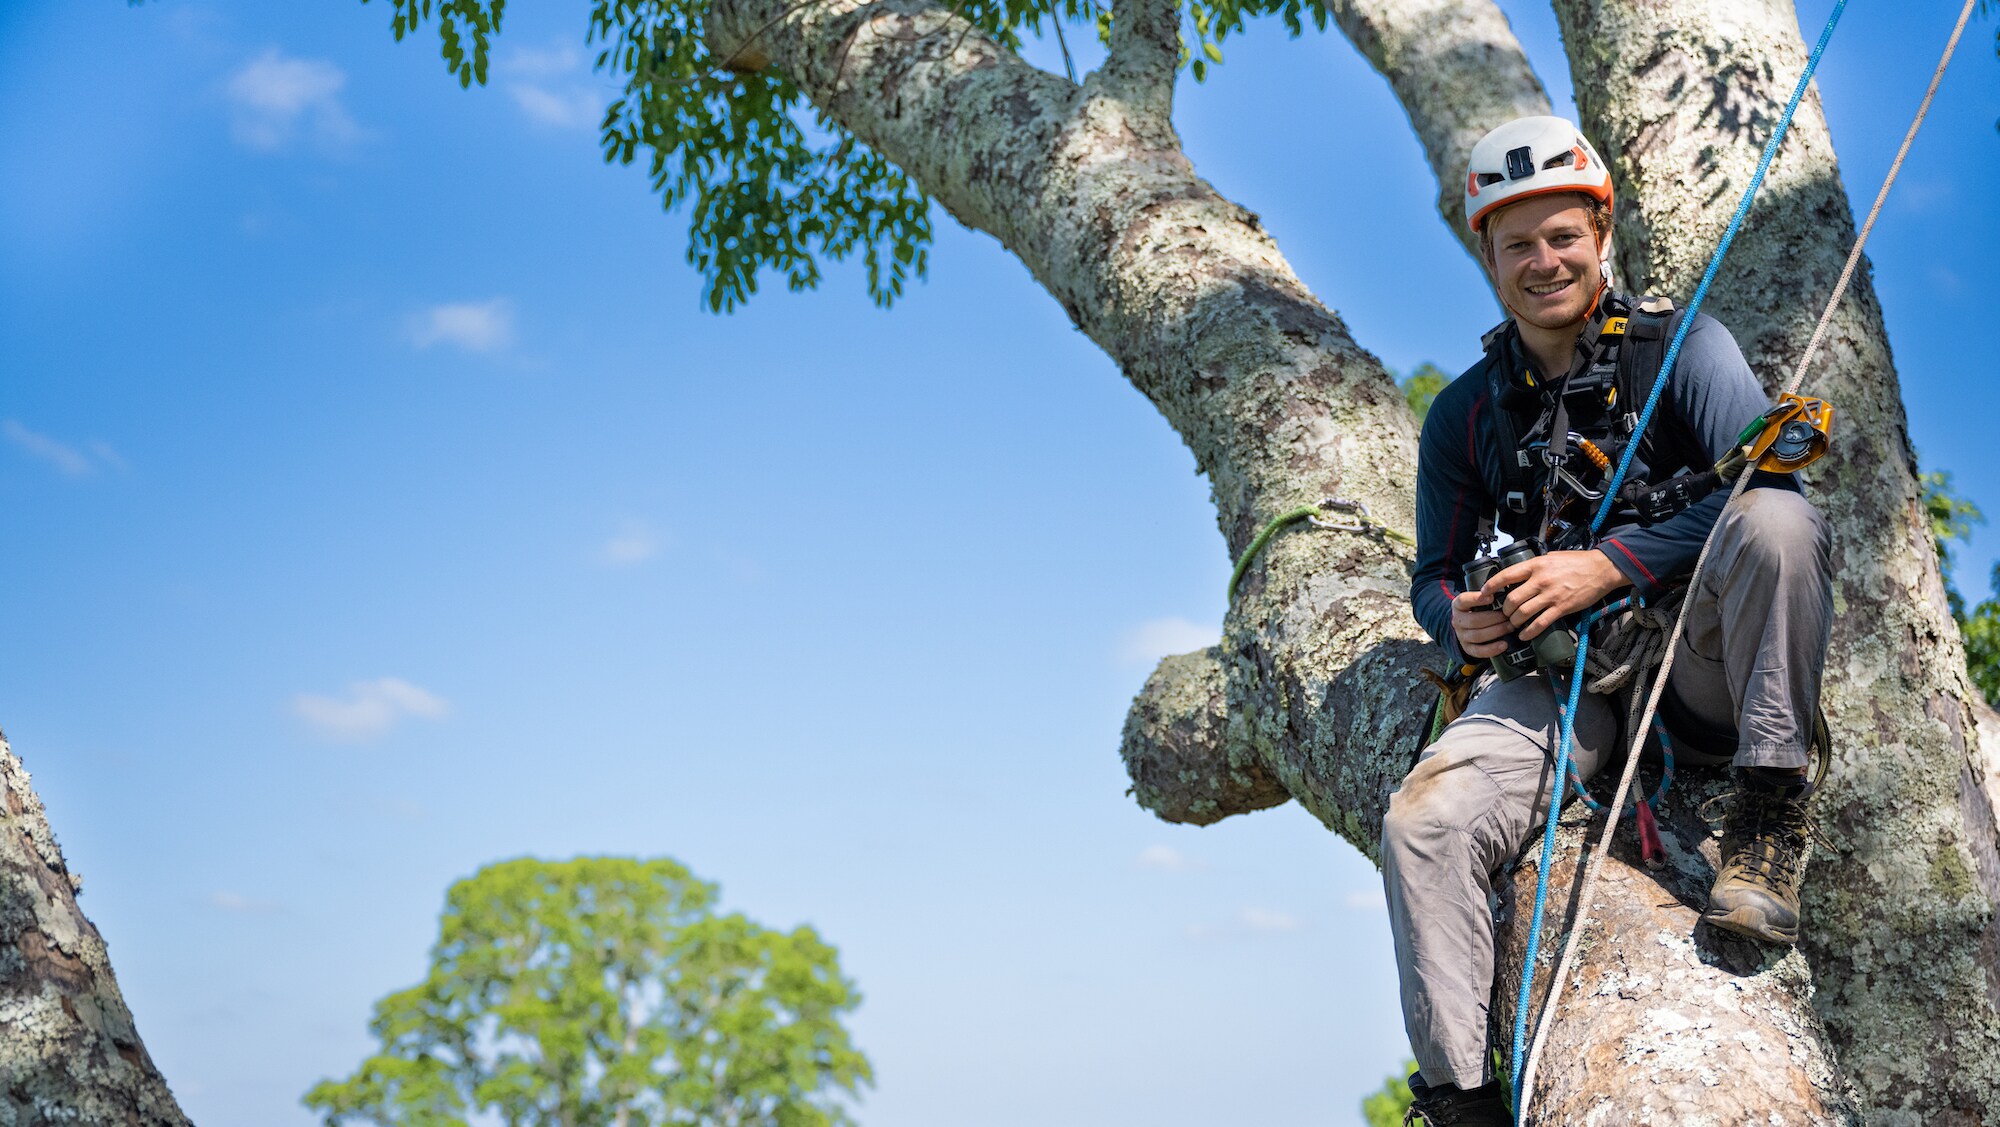 Bertie Gregory in Kasanka's tallest tree. (Credit: National Geographic/Oliver Laker for Disney+)